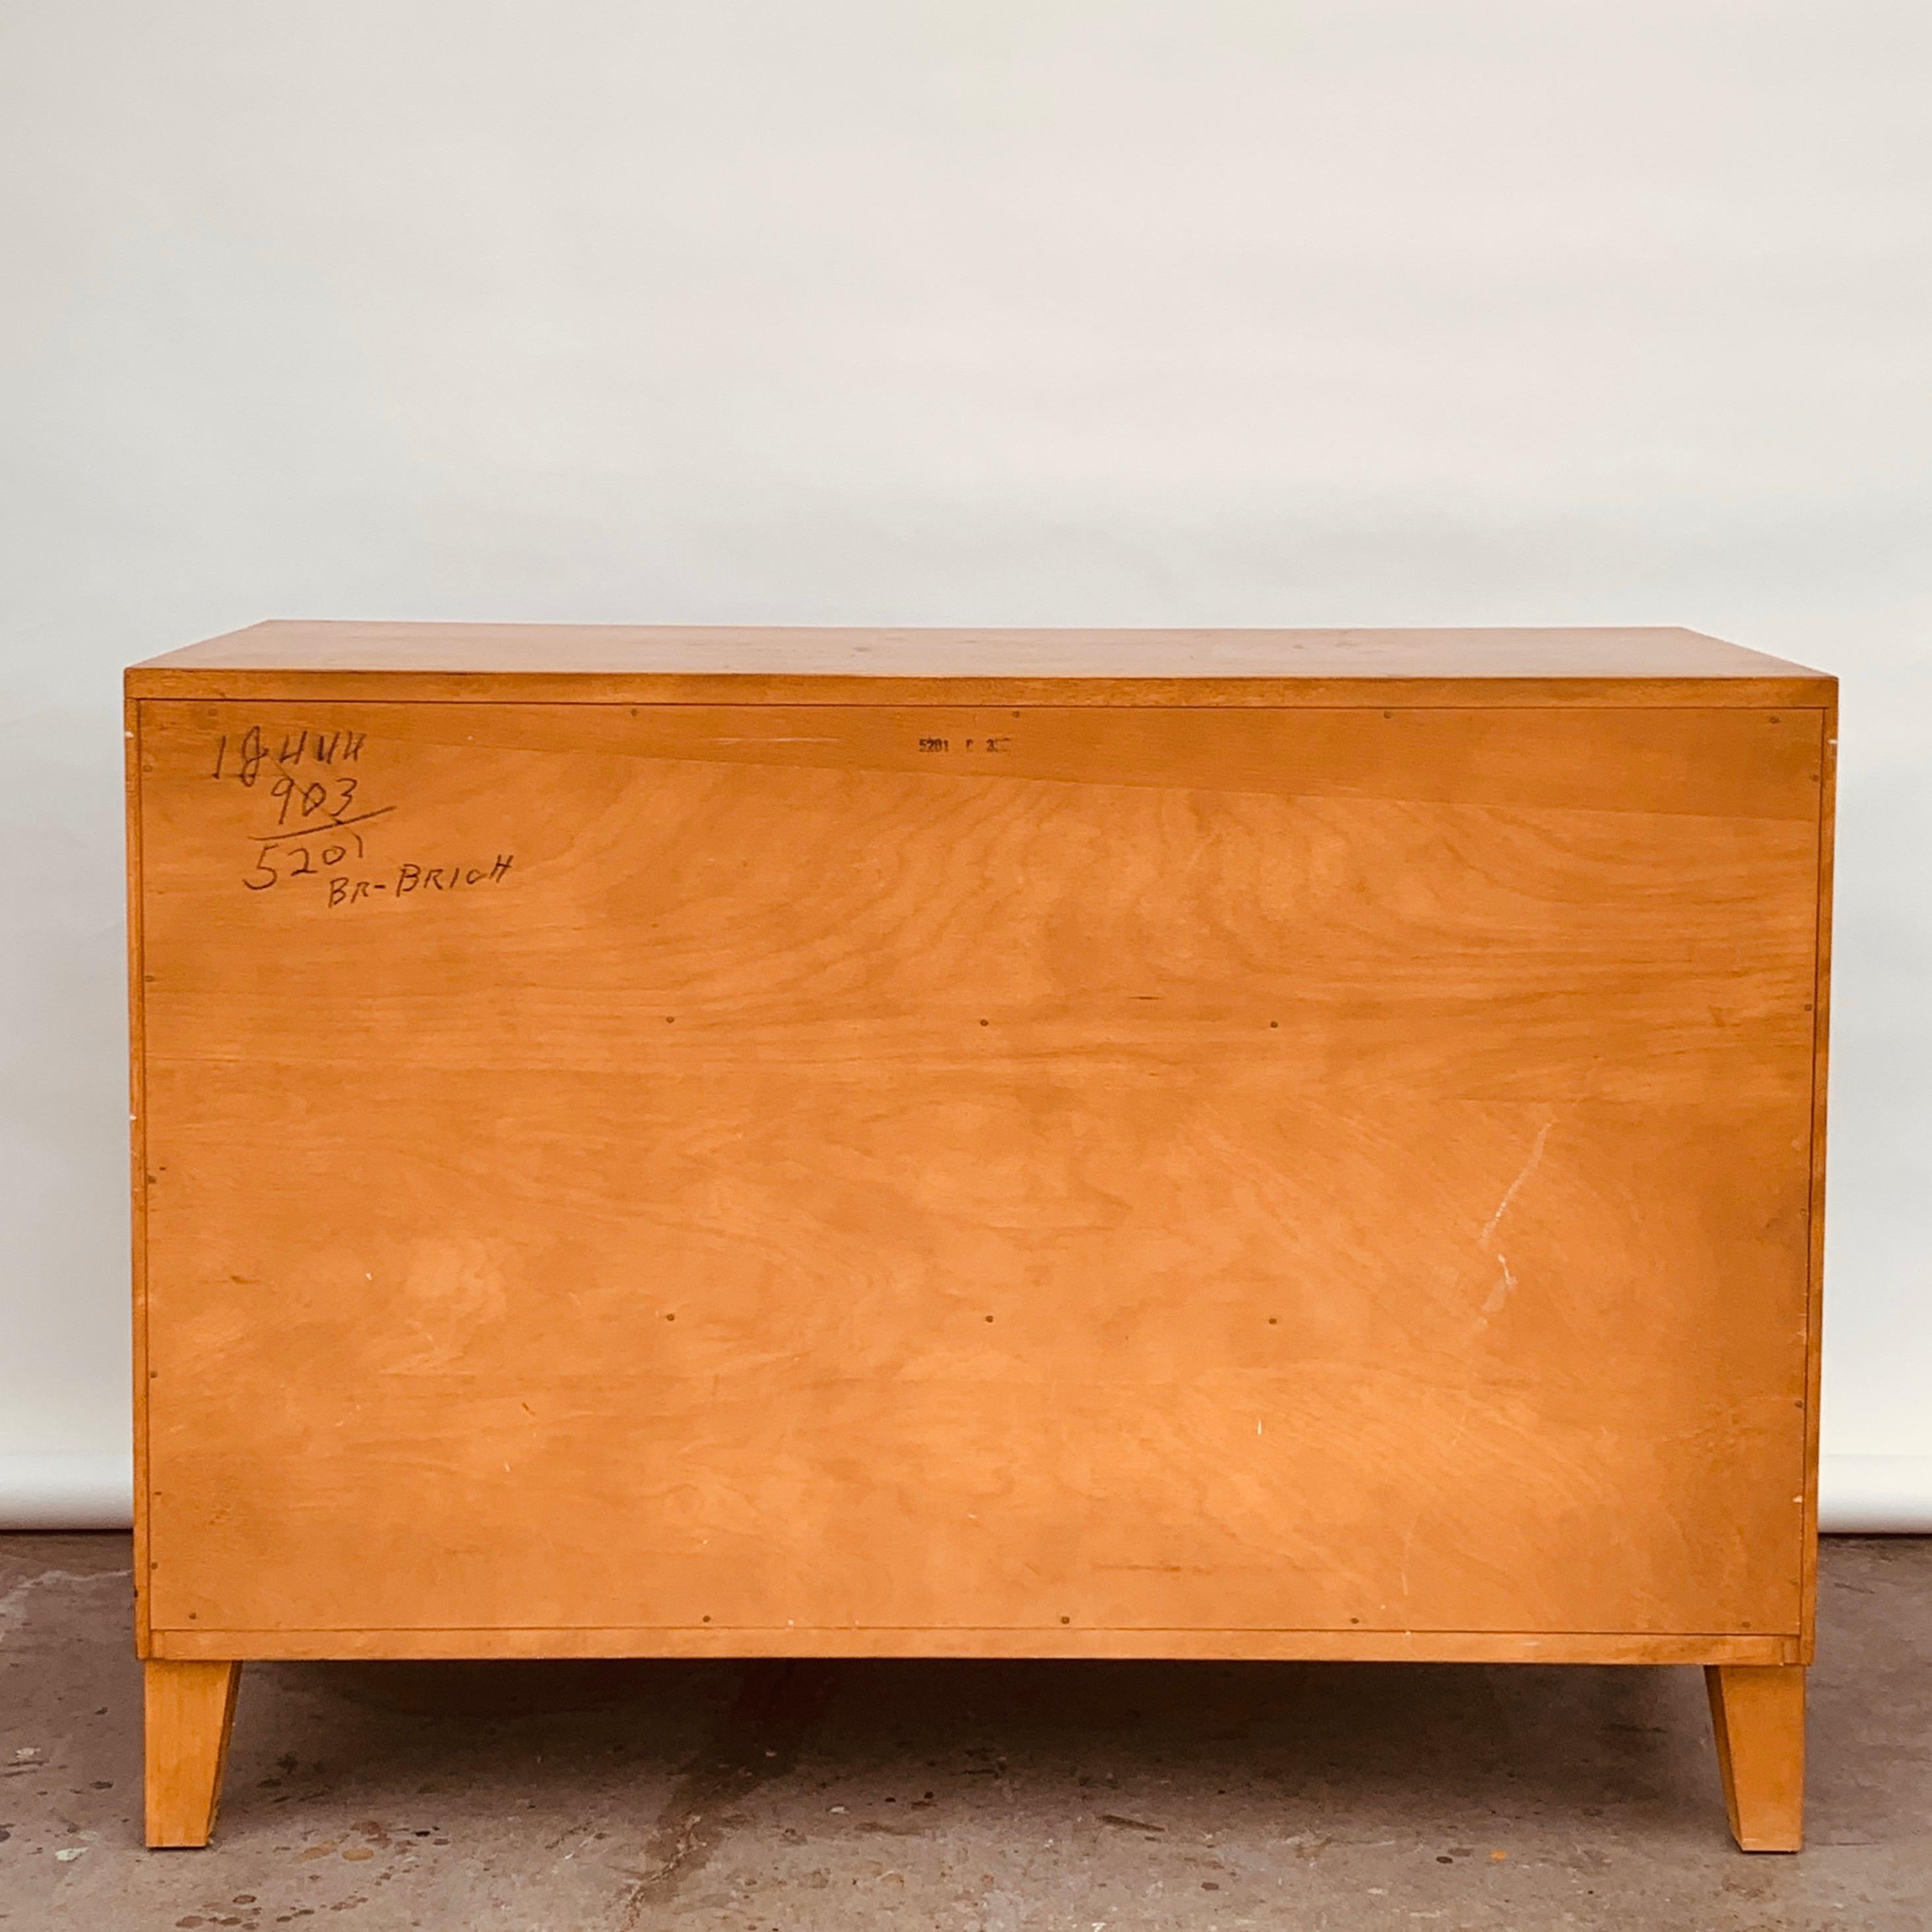 Stained Elegant Chest of Drawers or Dresser by Leslie Diamond for Conant Ball